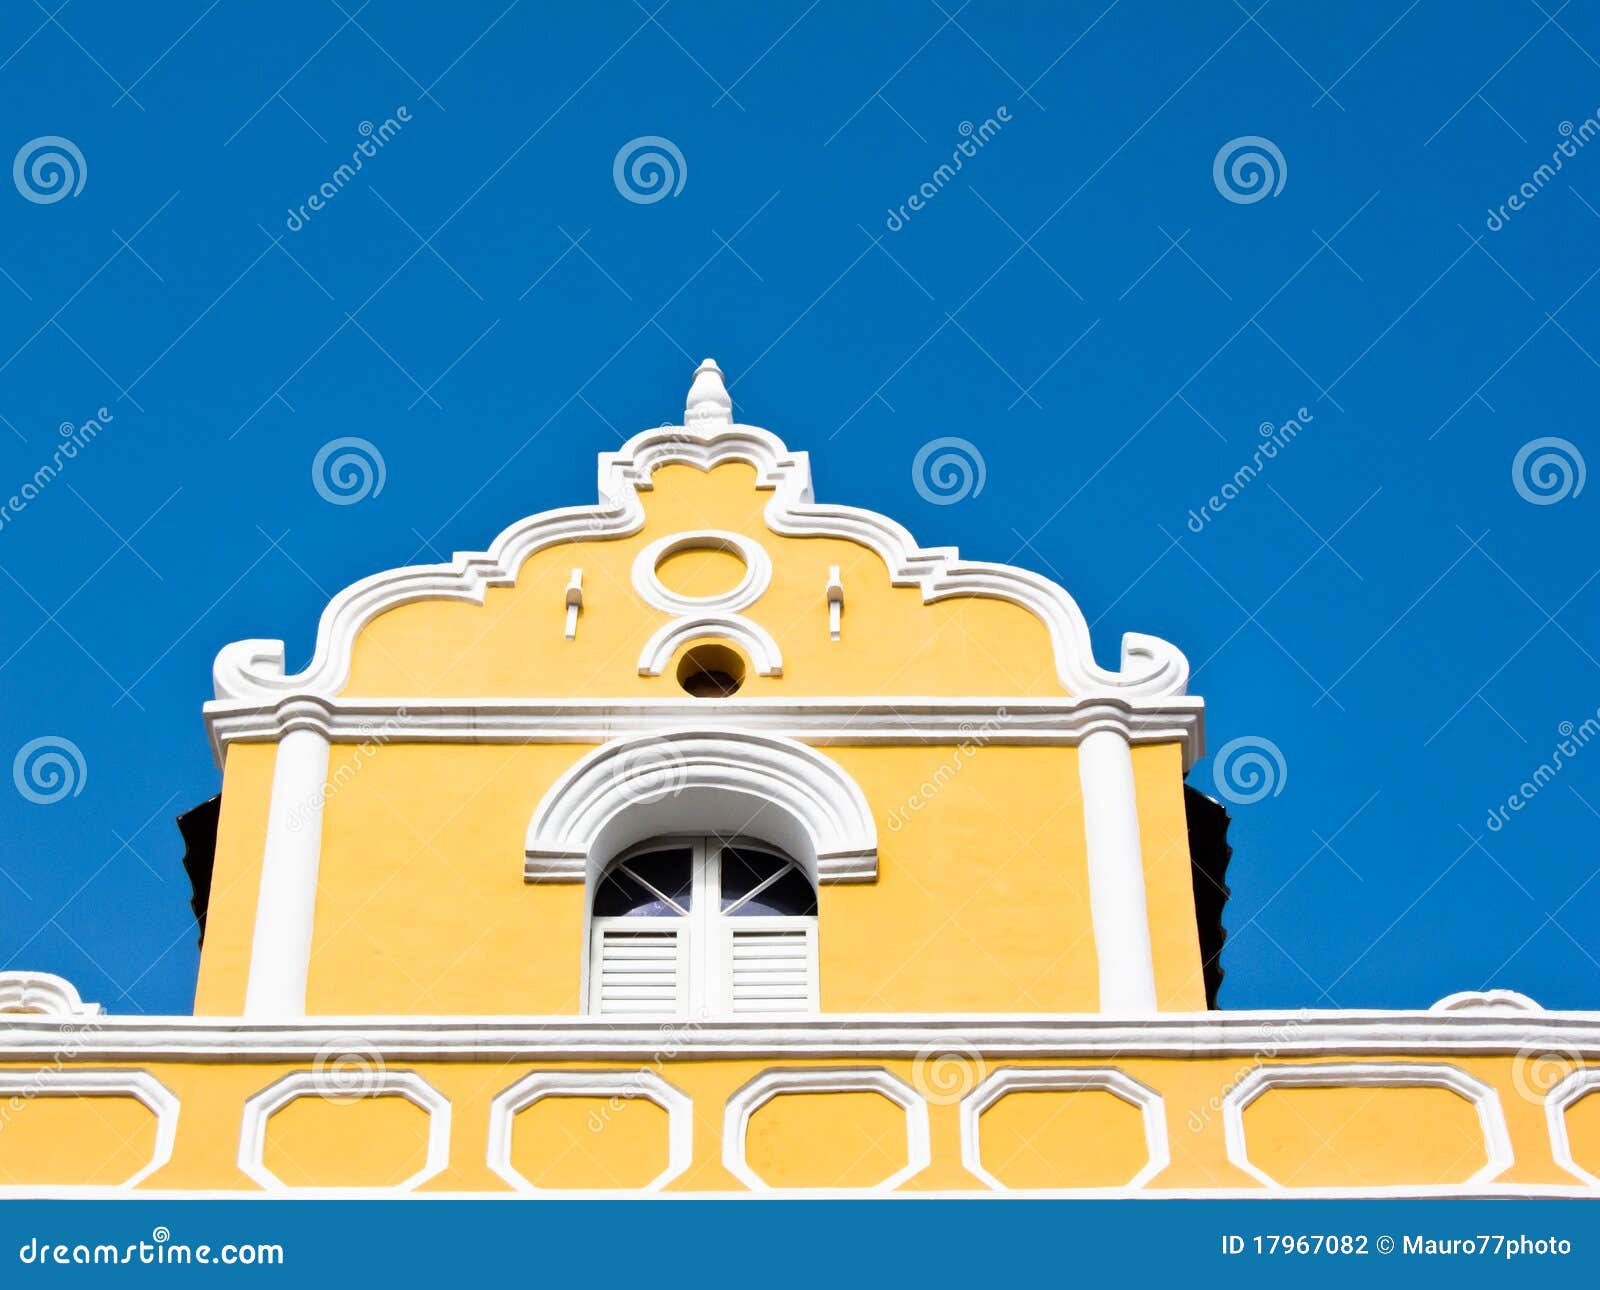 colonial building in willemstad, curacao